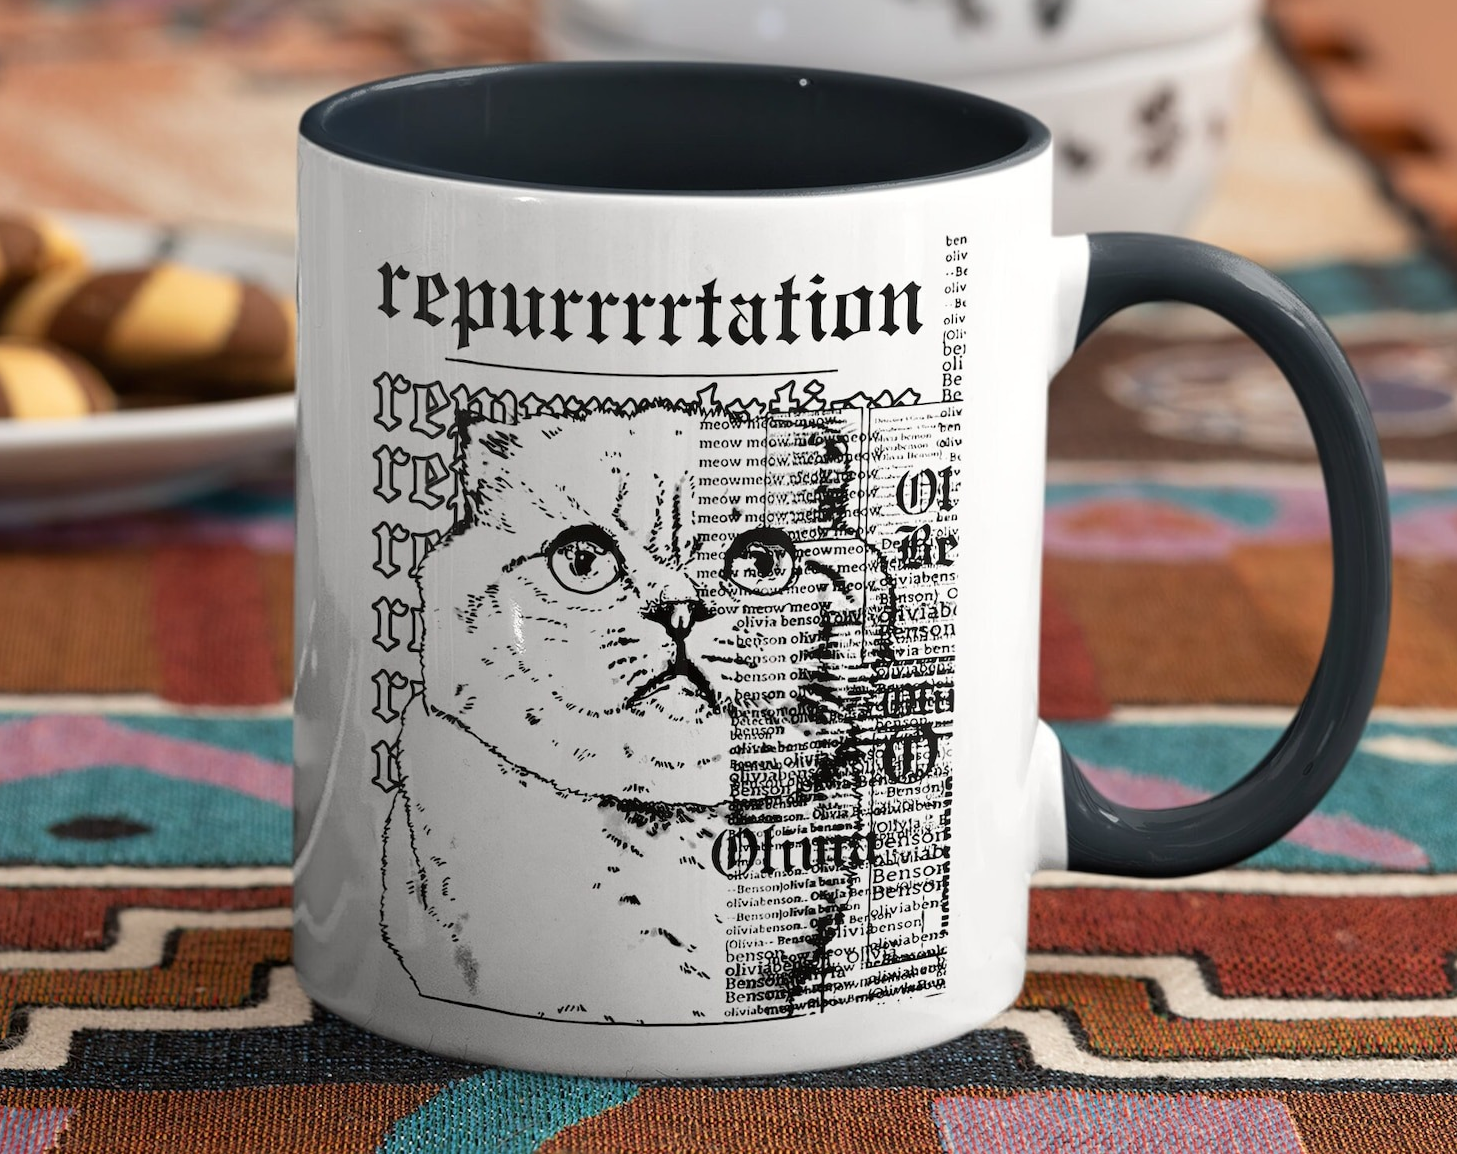 black and white mug with reputation album cover recreated with one of the cats and text repurrrrtation